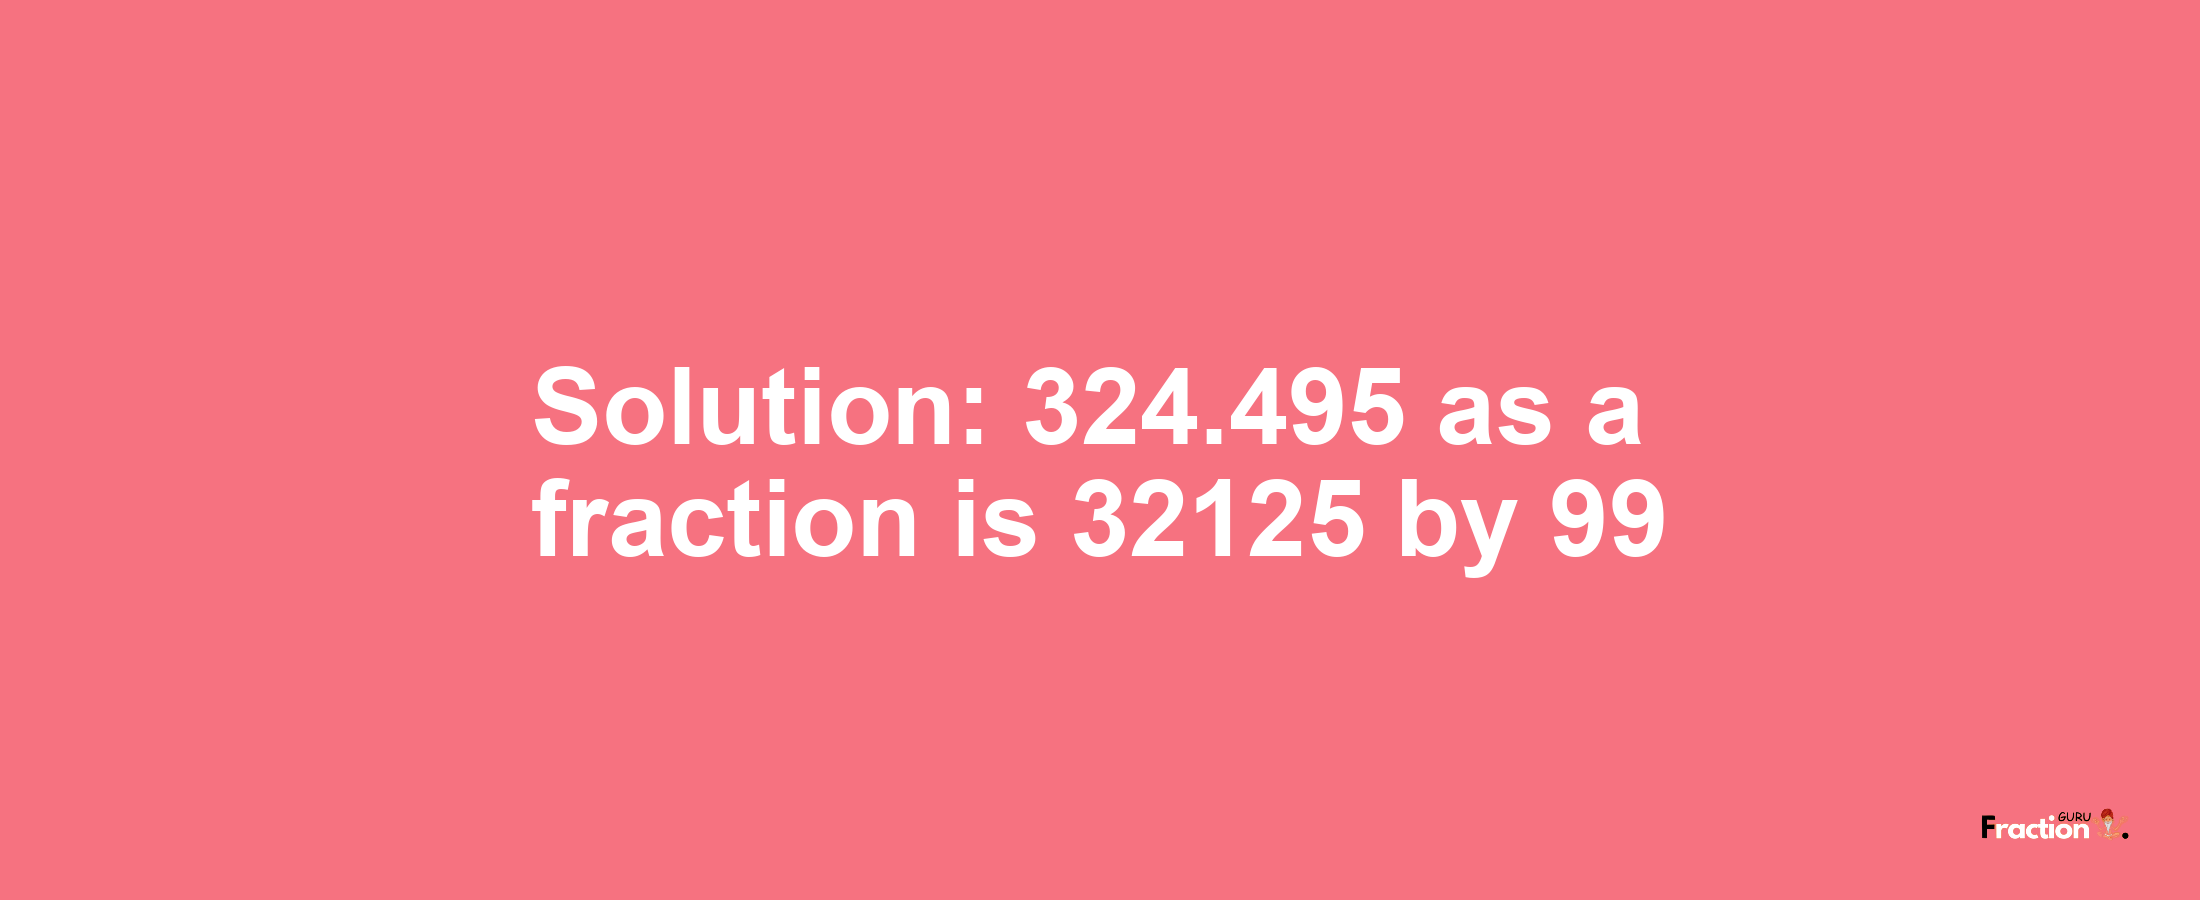 Solution:324.495 as a fraction is 32125/99